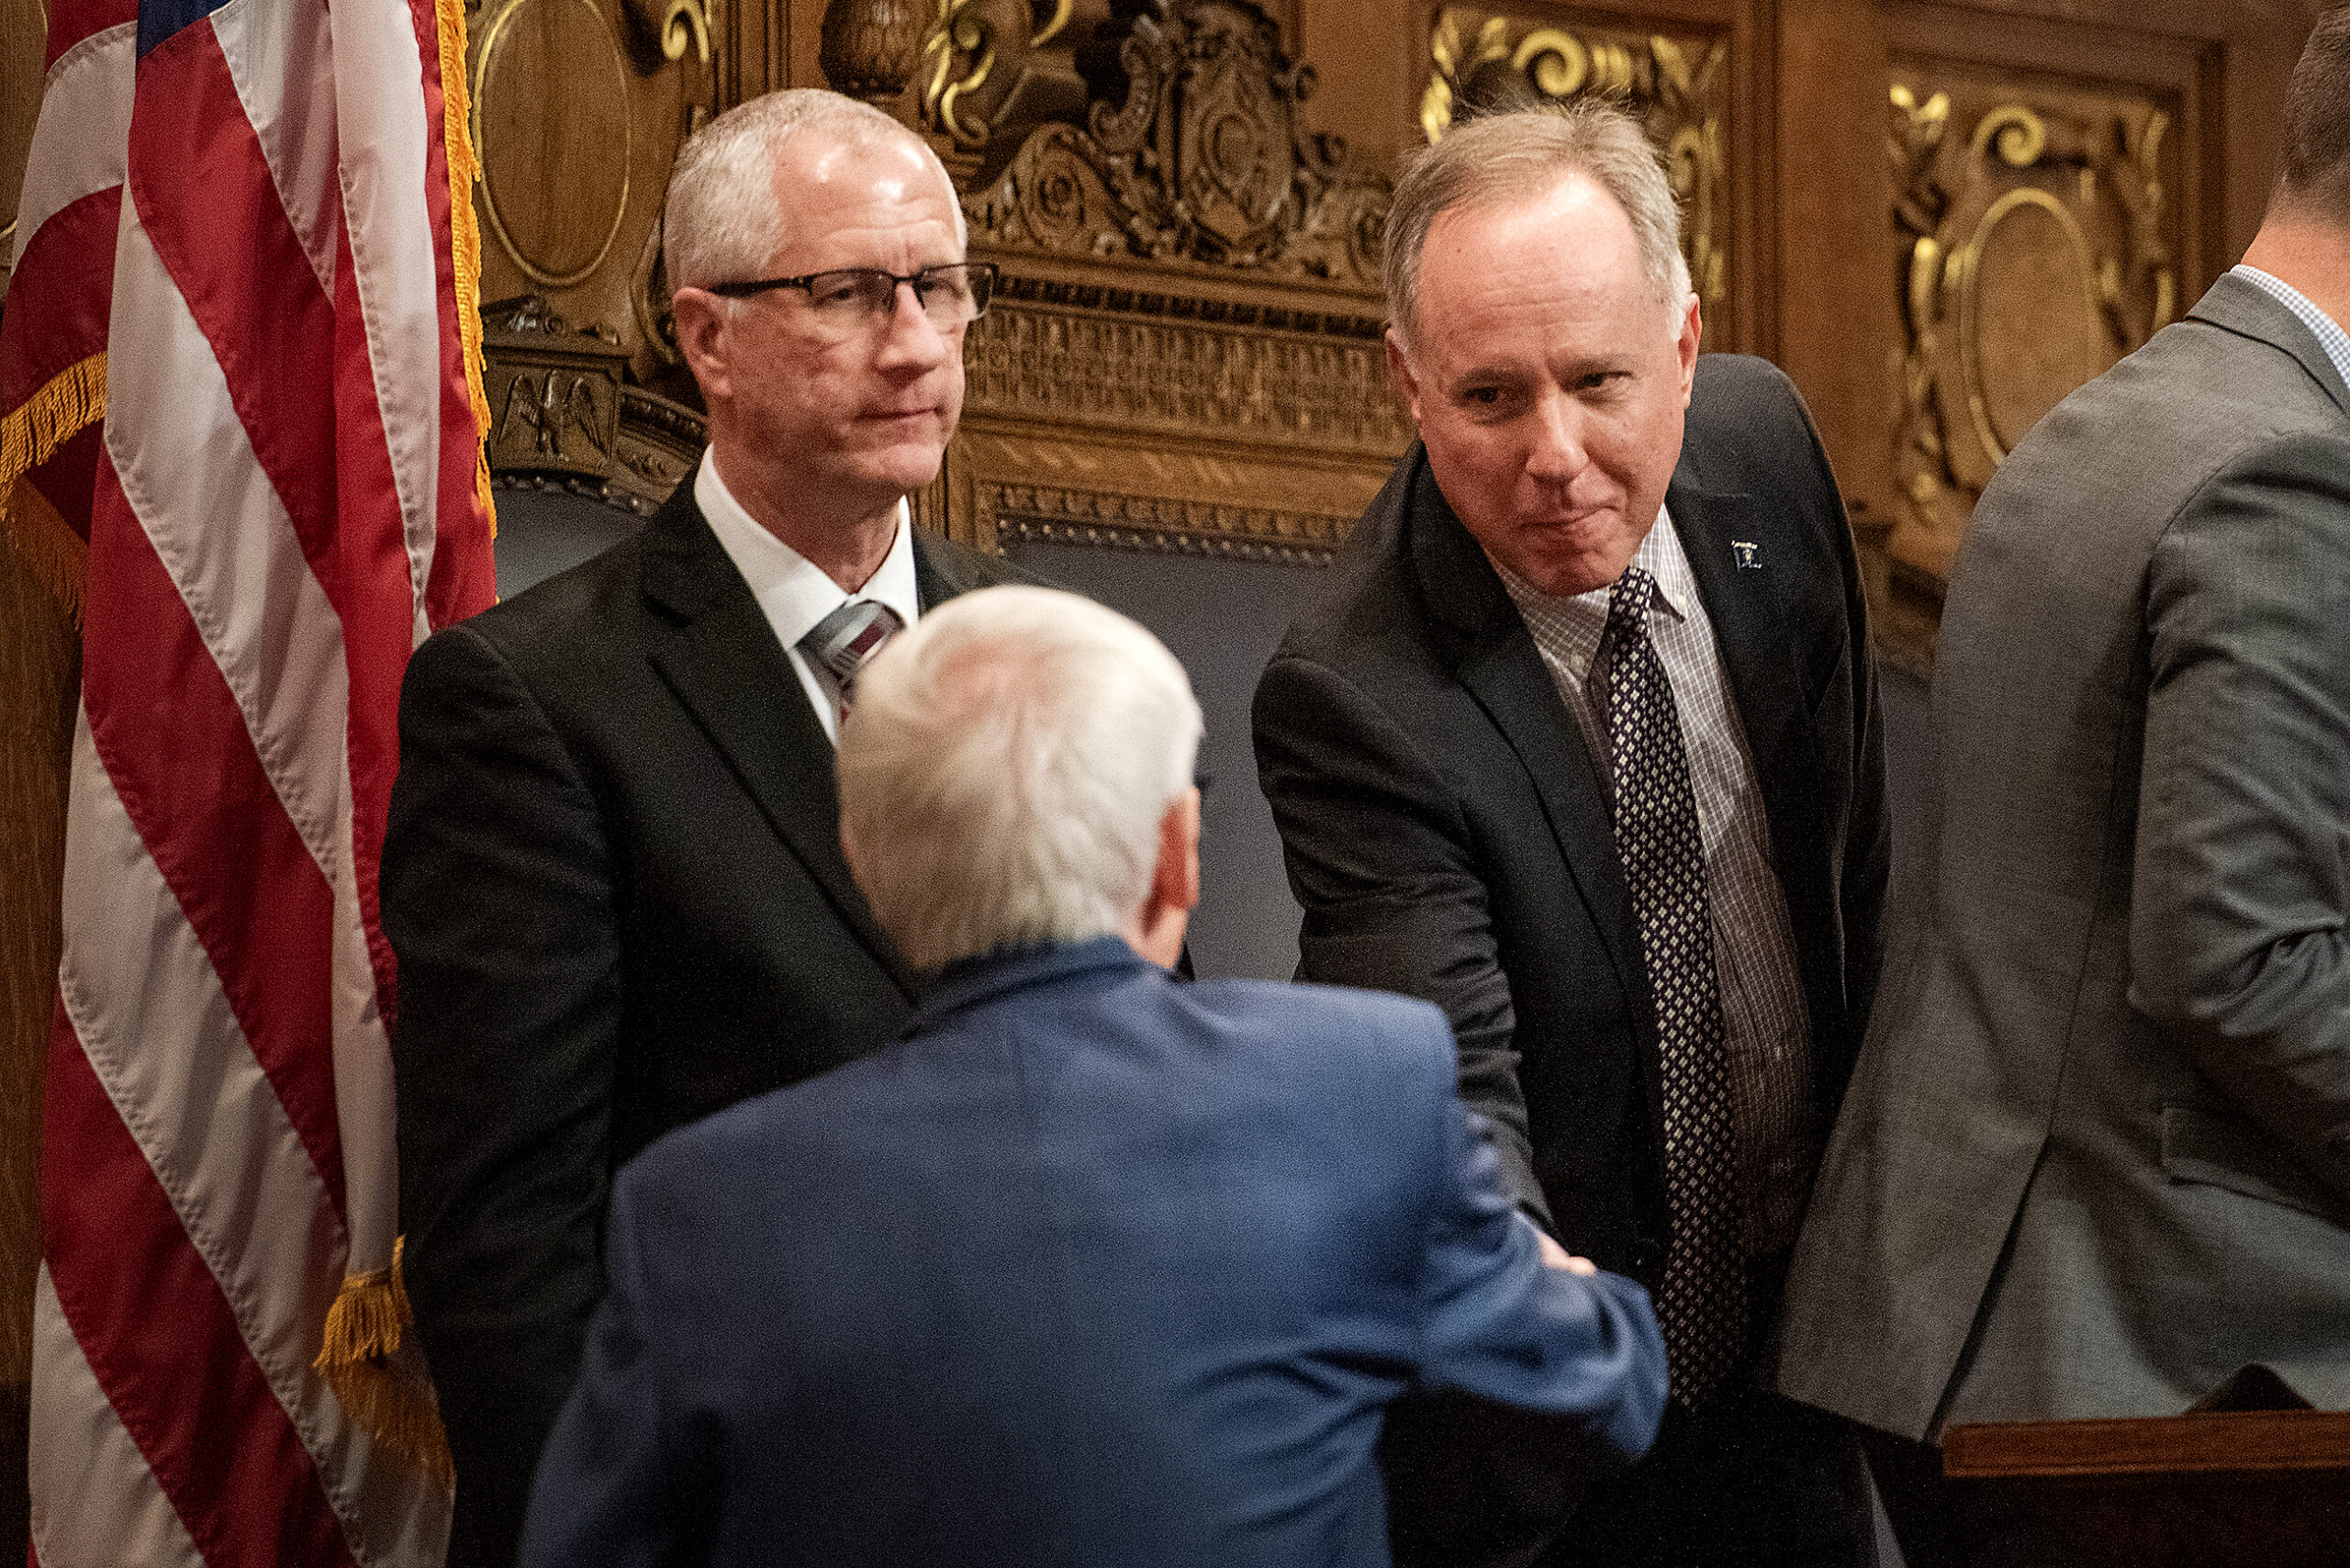 Assembly Speaker Vos leans forward to shake hands with Gov. Evers.